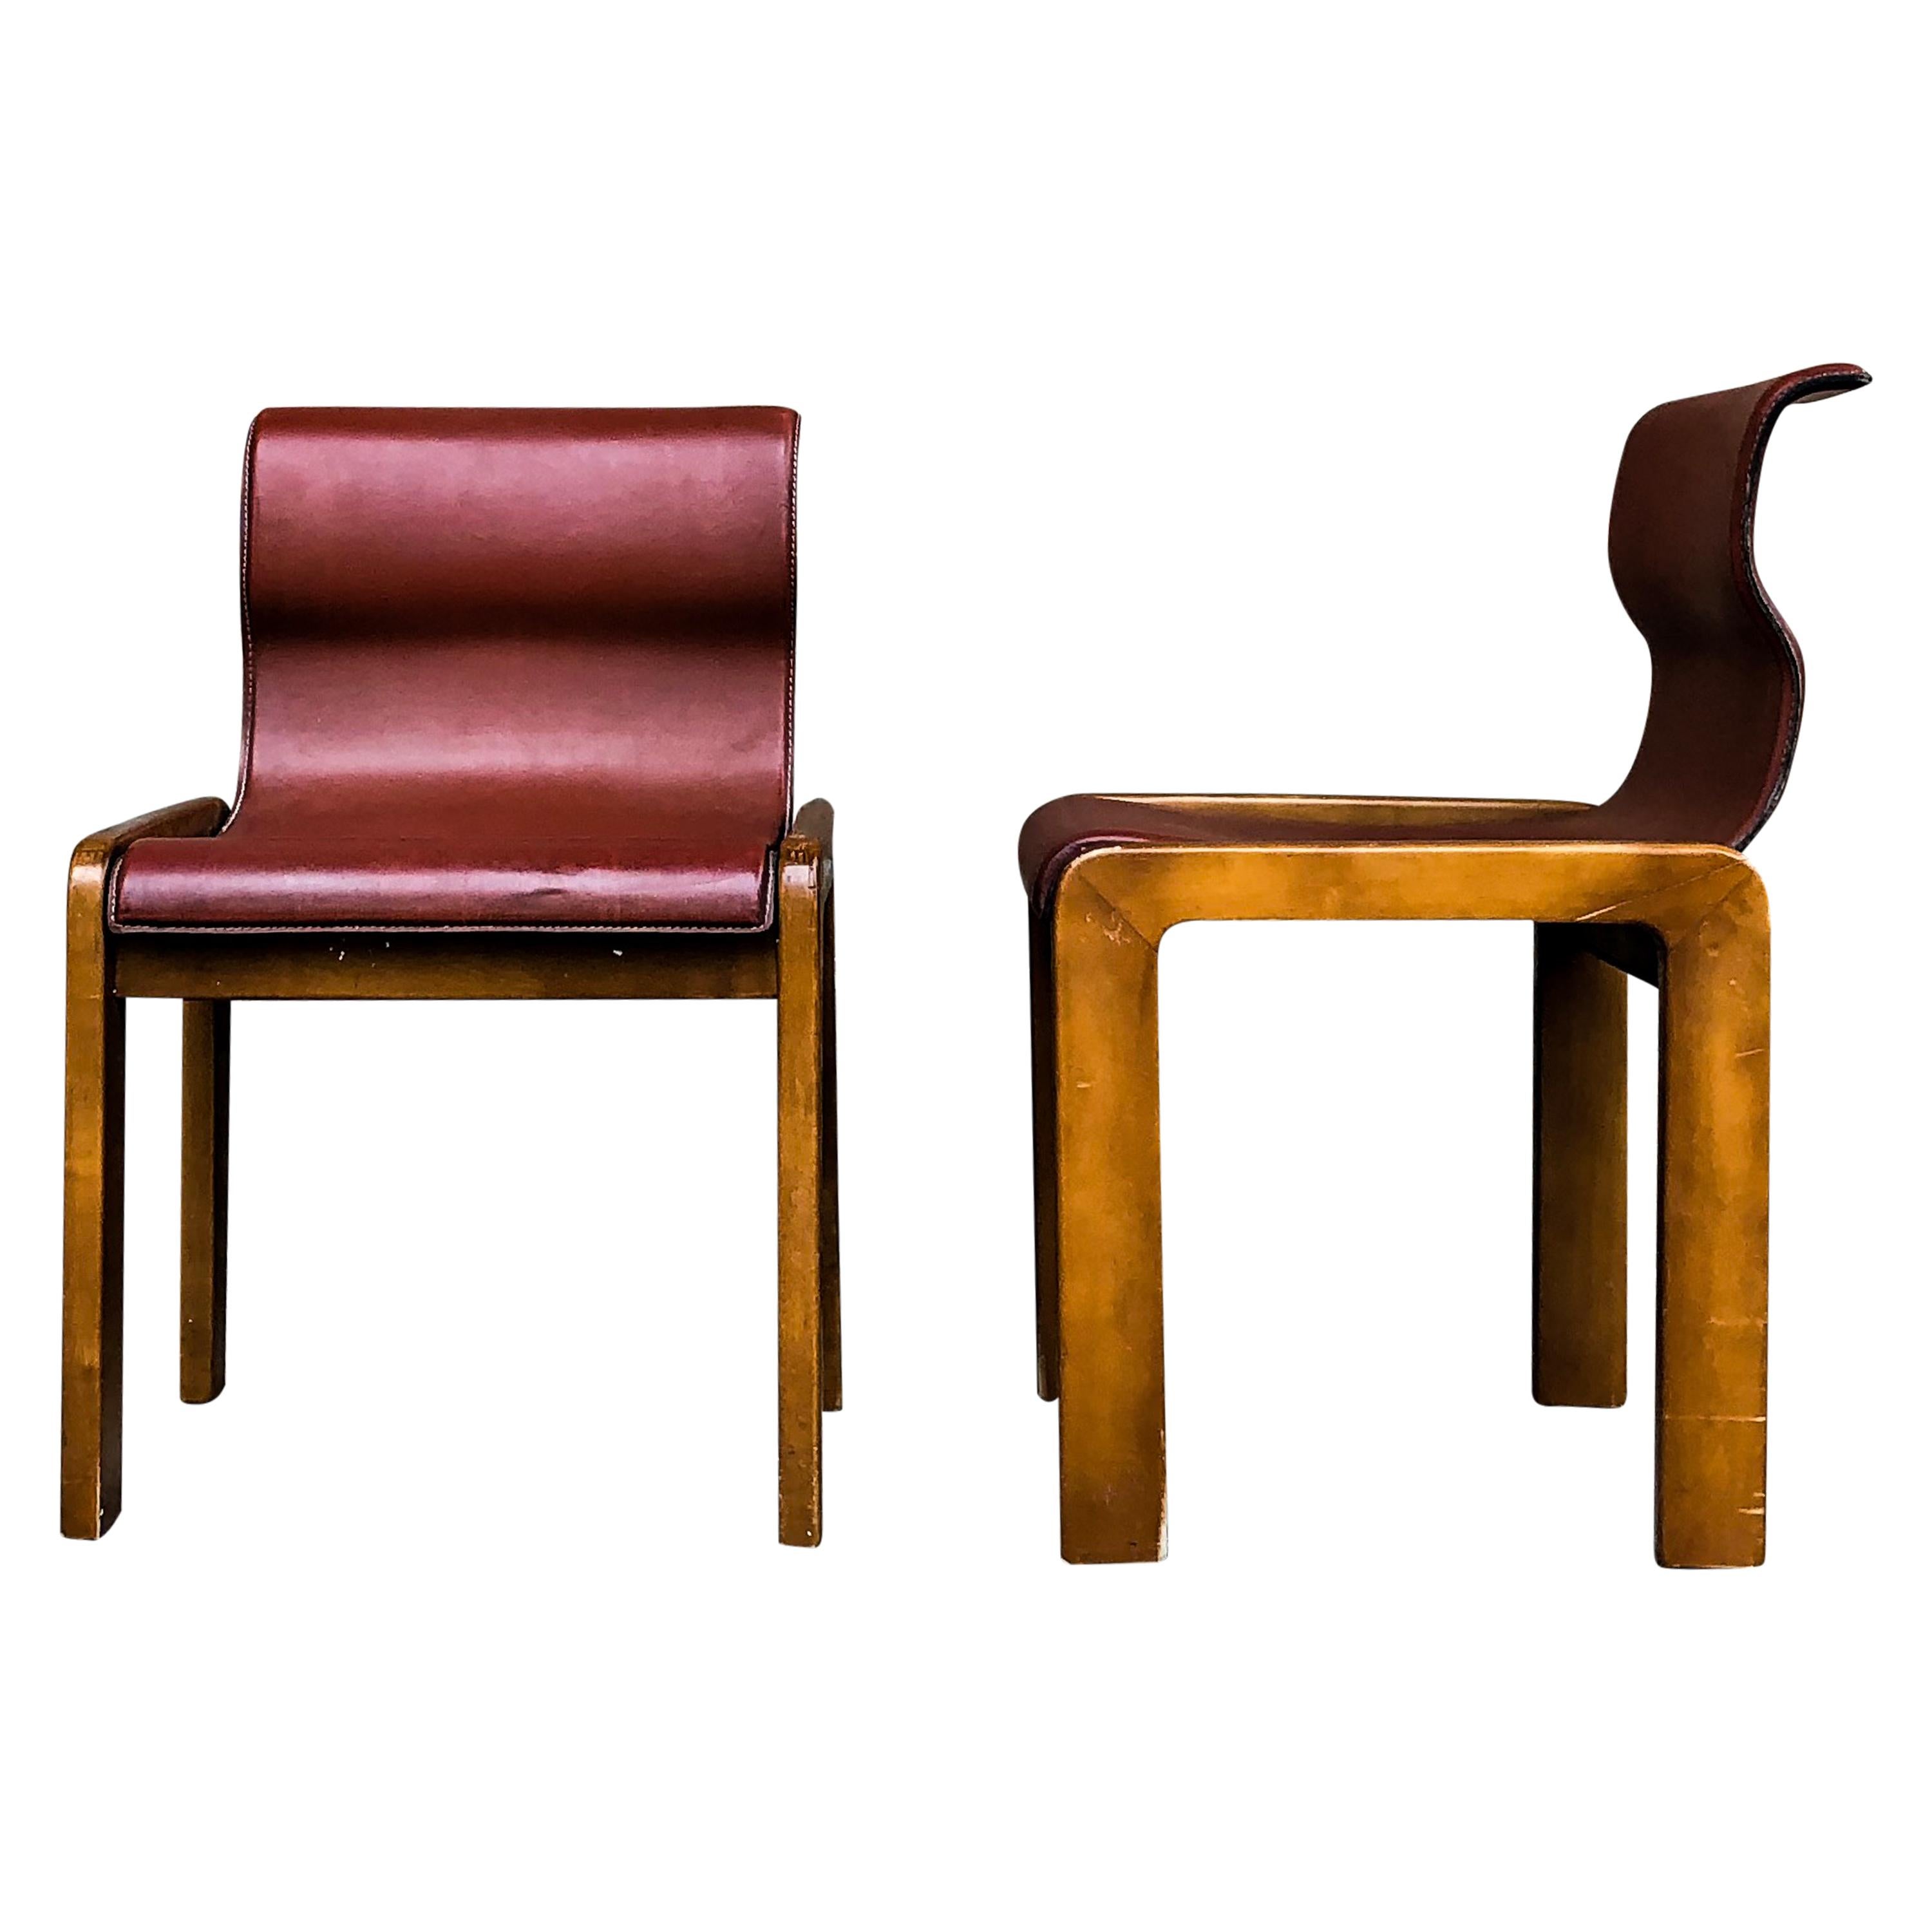 Afra & Tobia Scarpa Midcentury Leather and Plywood Dining Chair, 1966, Set of 4 For Sale 6